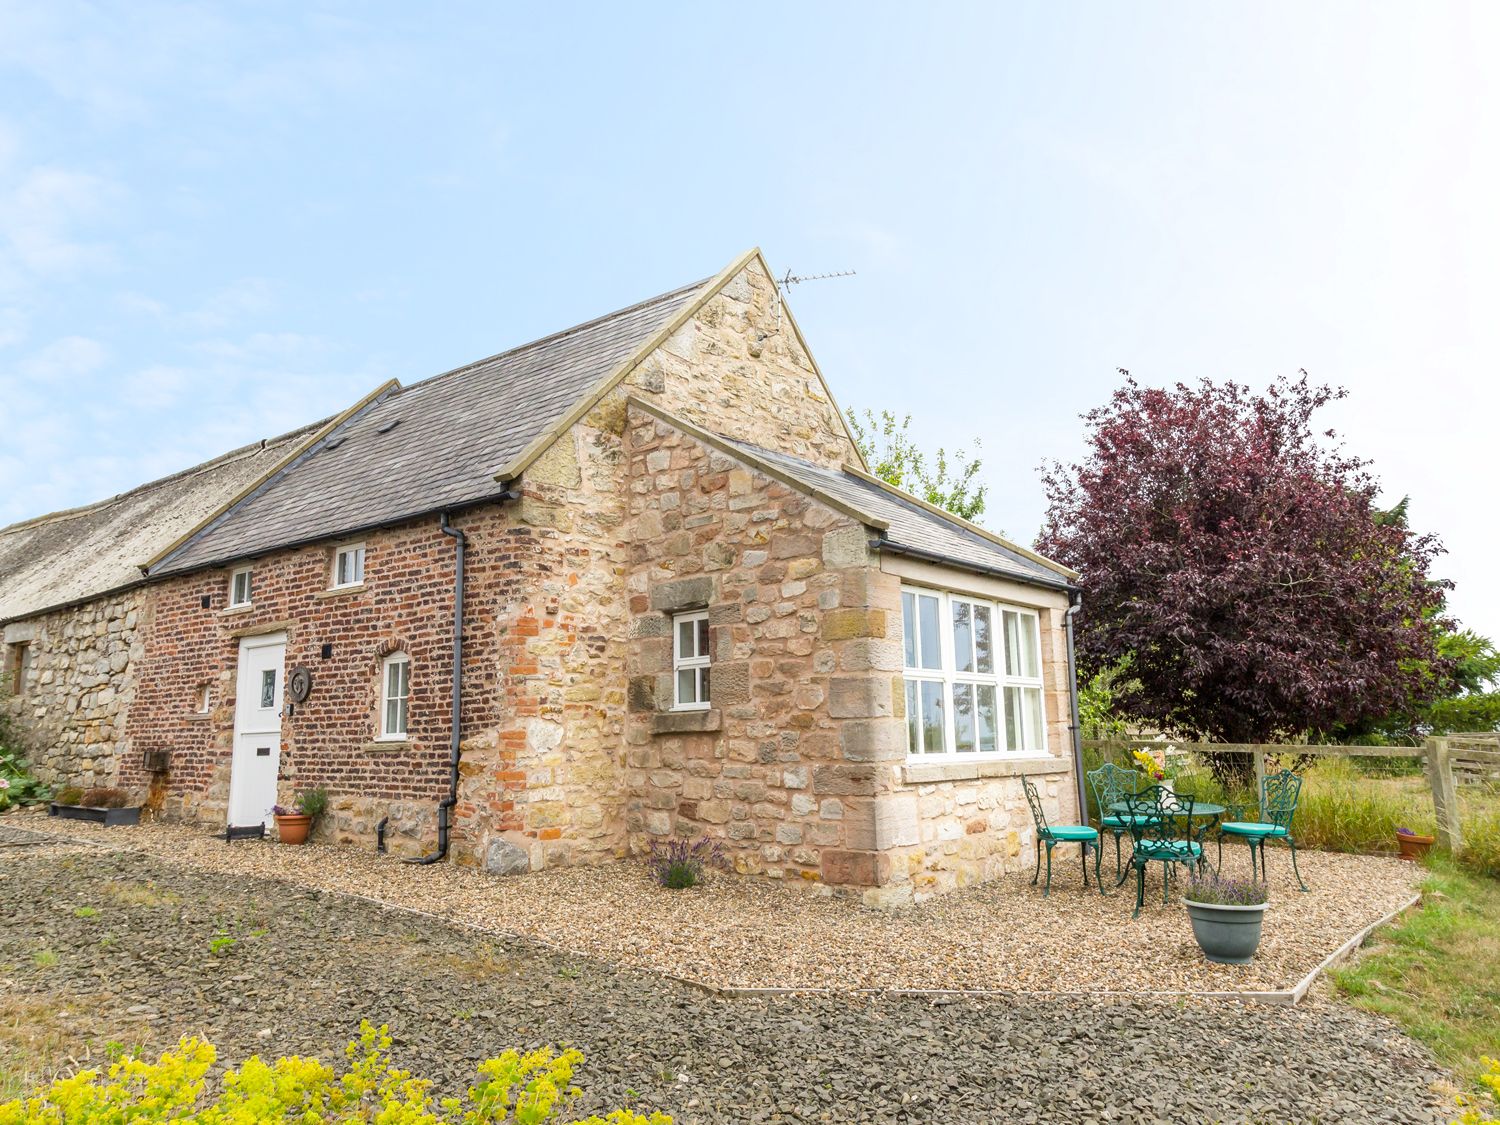 Northumberland Holiday Cottages: The Bothy, Lowick nr. Holy Island | sykescottages.co.uk 